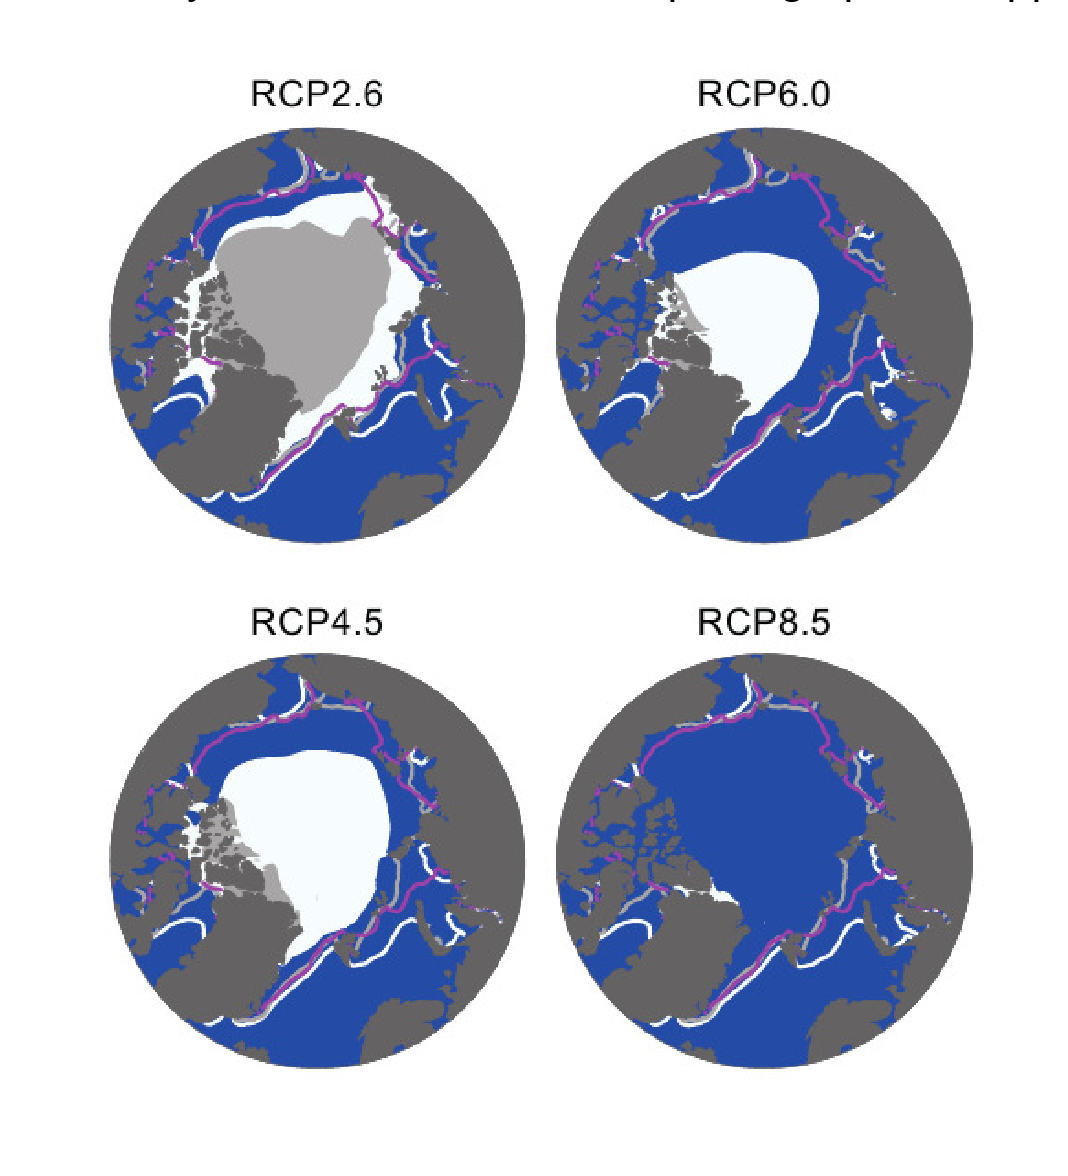 The spatial pattern of September Arctic sea ice extent projected by IPCC AR5 models for the four RCP scenarios over the period 2081-2100.